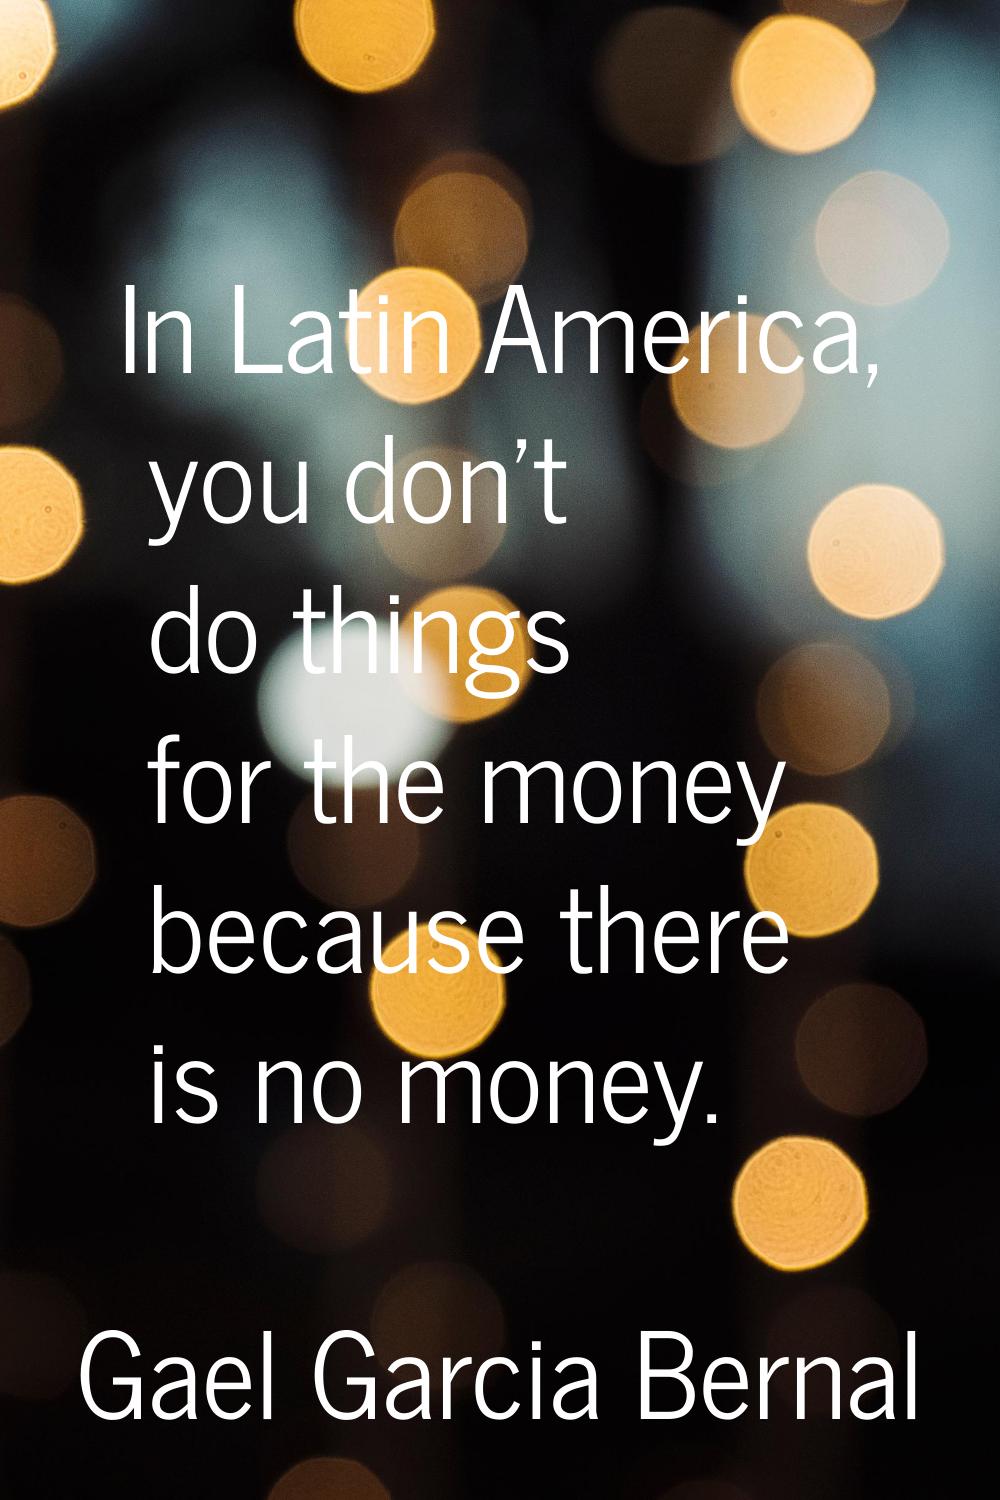 In Latin America, you don't do things for the money because there is no money.